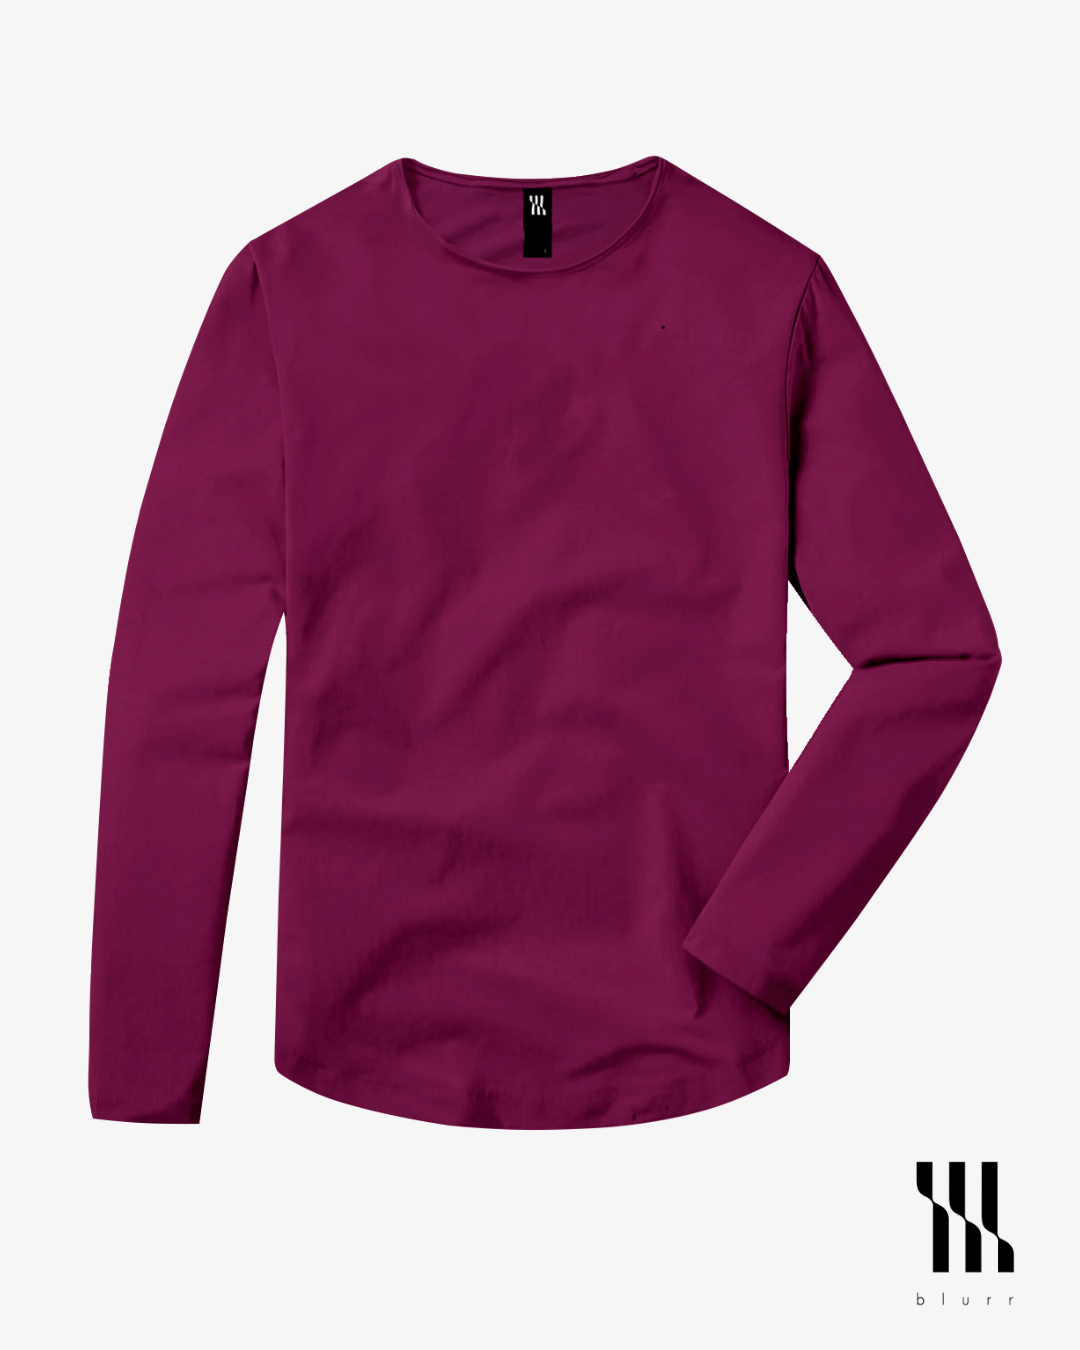 Cherry Wine T-shirt - Long Sleeve Wide Neck Curved Bottom